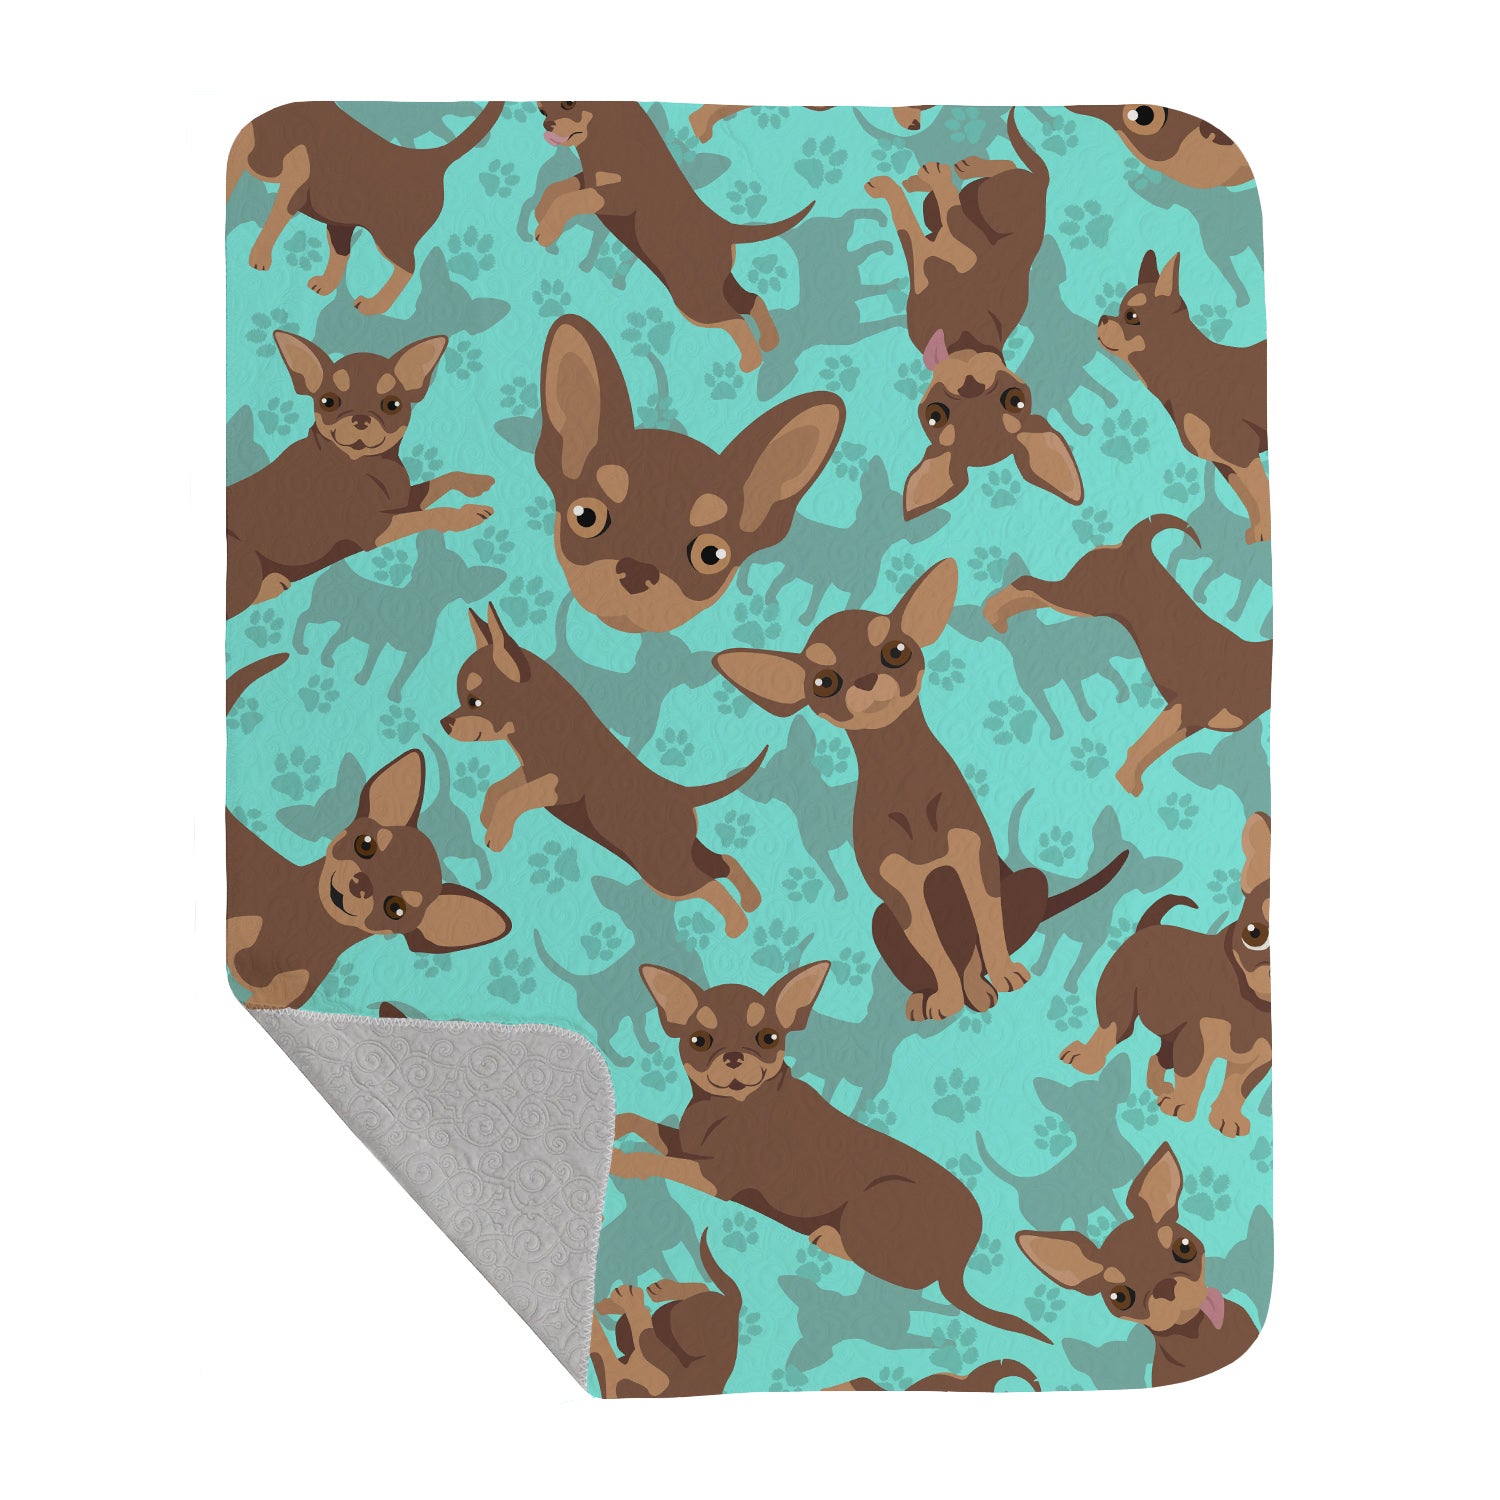 Buy this Chocolate Chihuahua Quilted Blanket 50x60